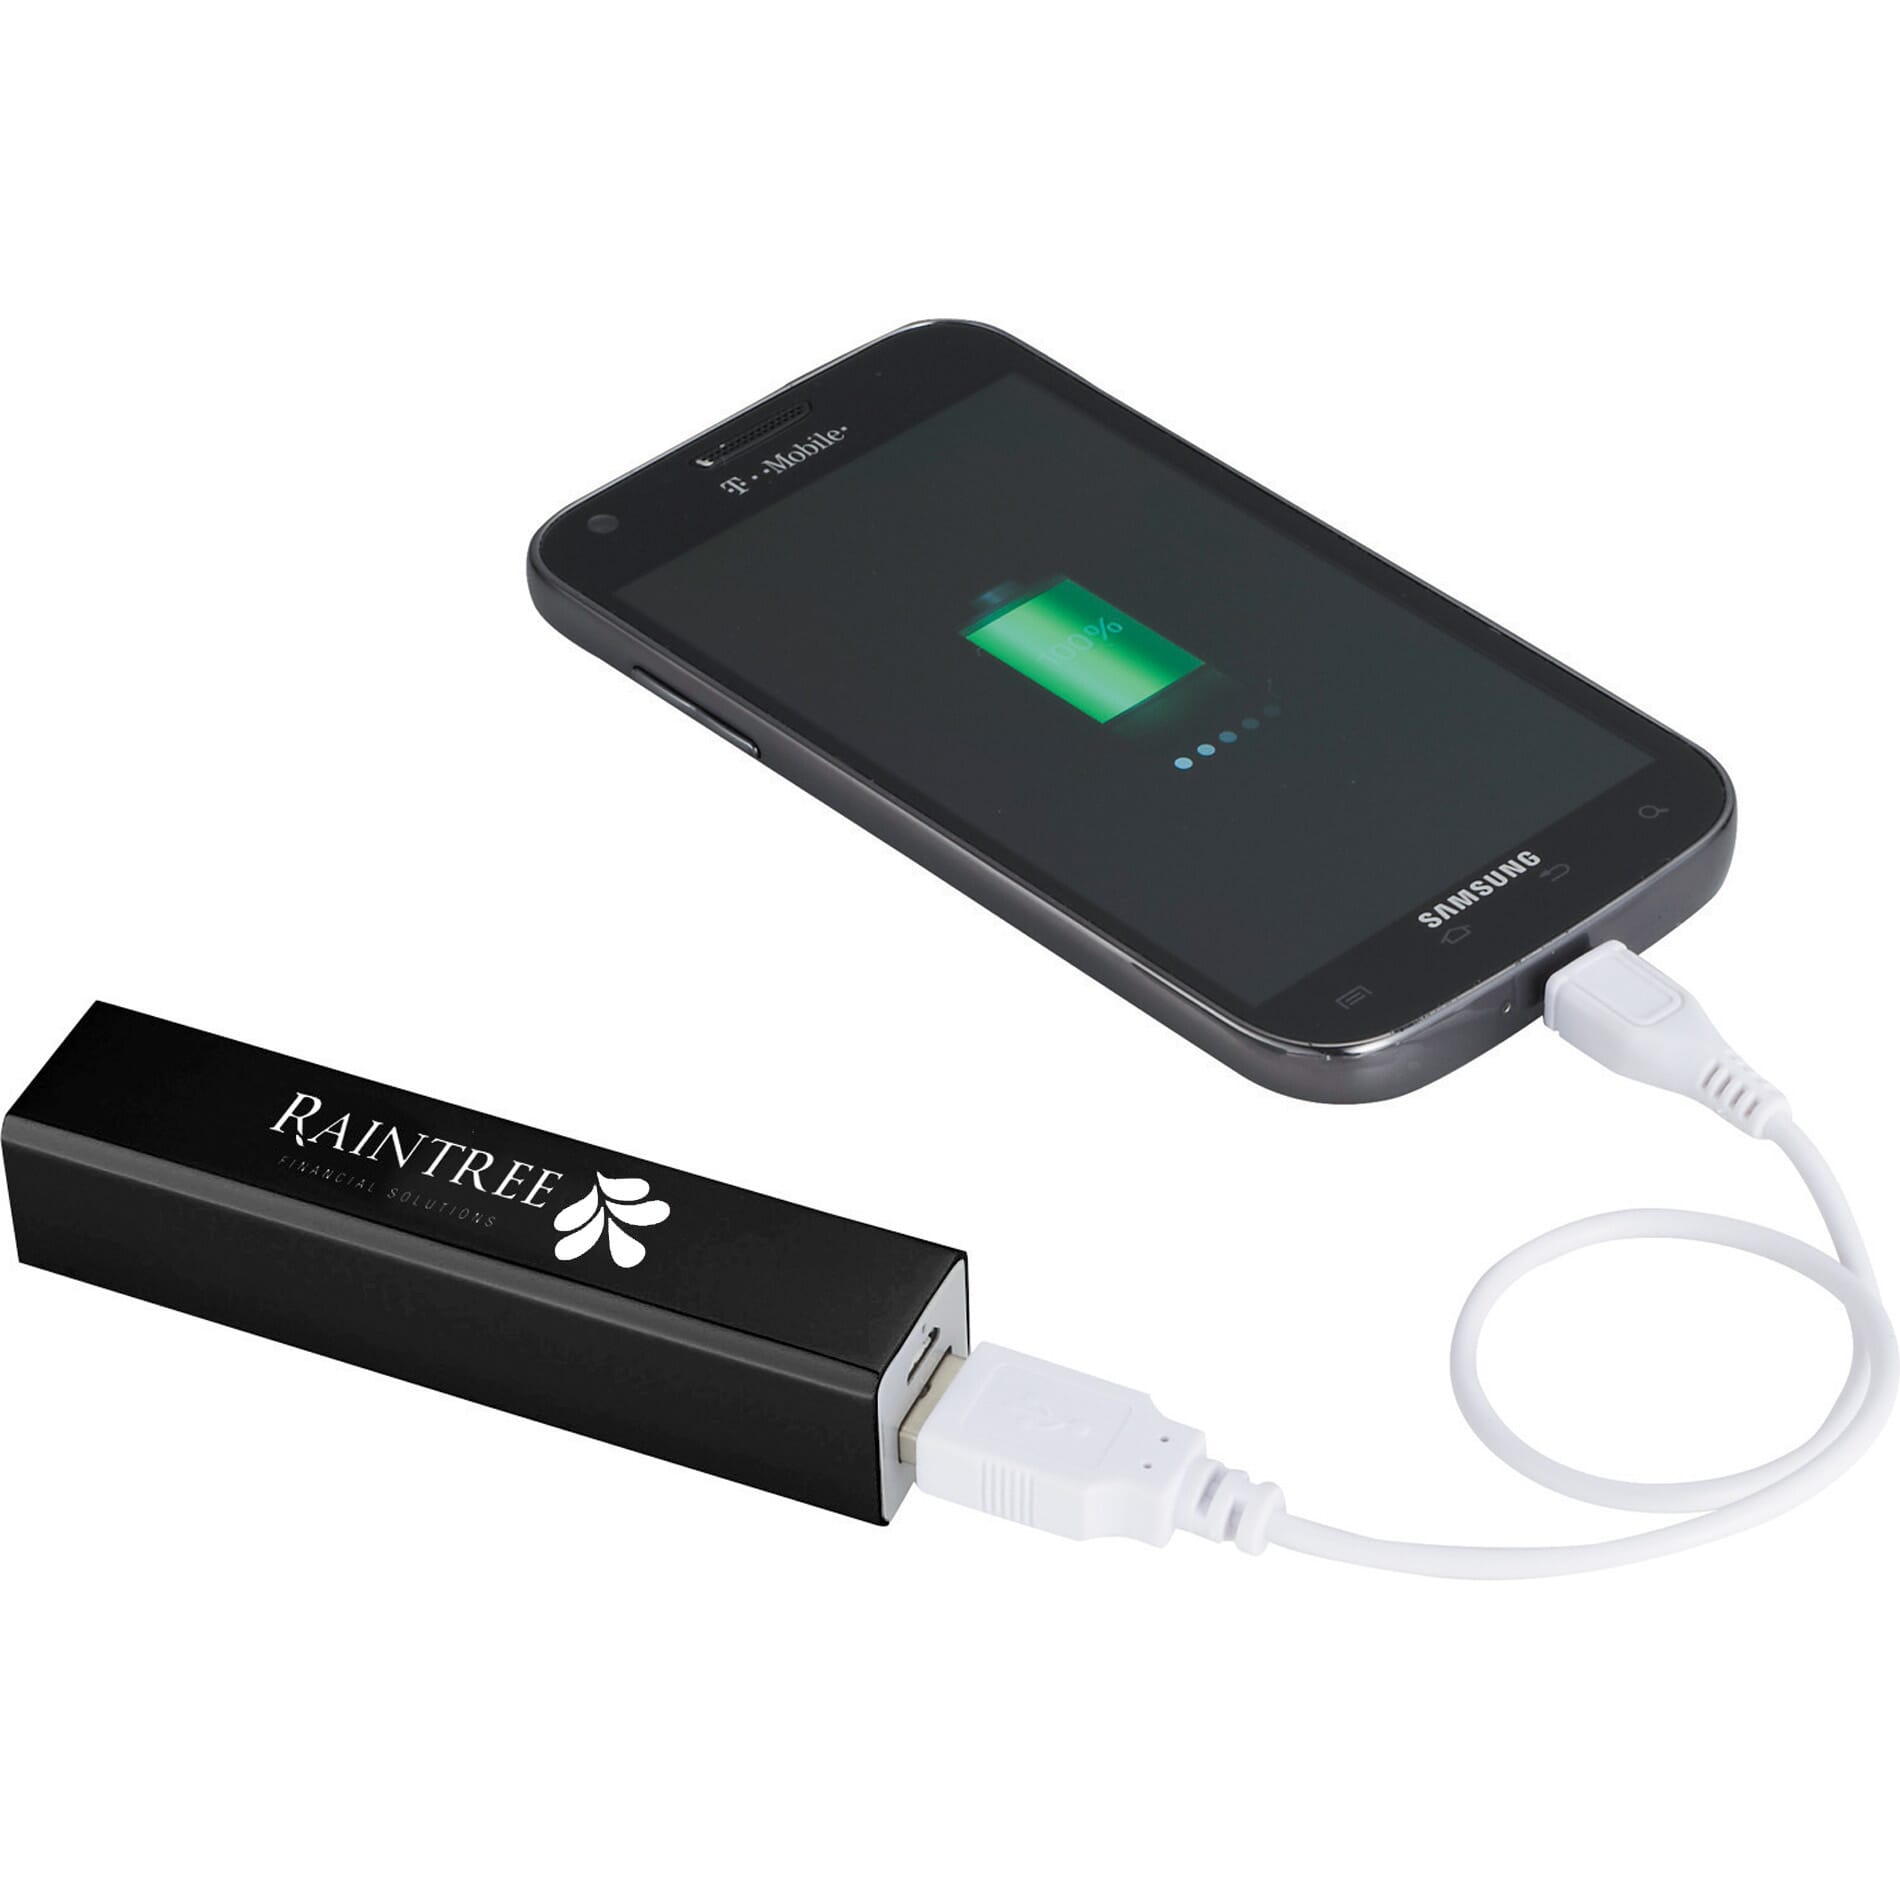 Power bank with logo, charginf and iphone.